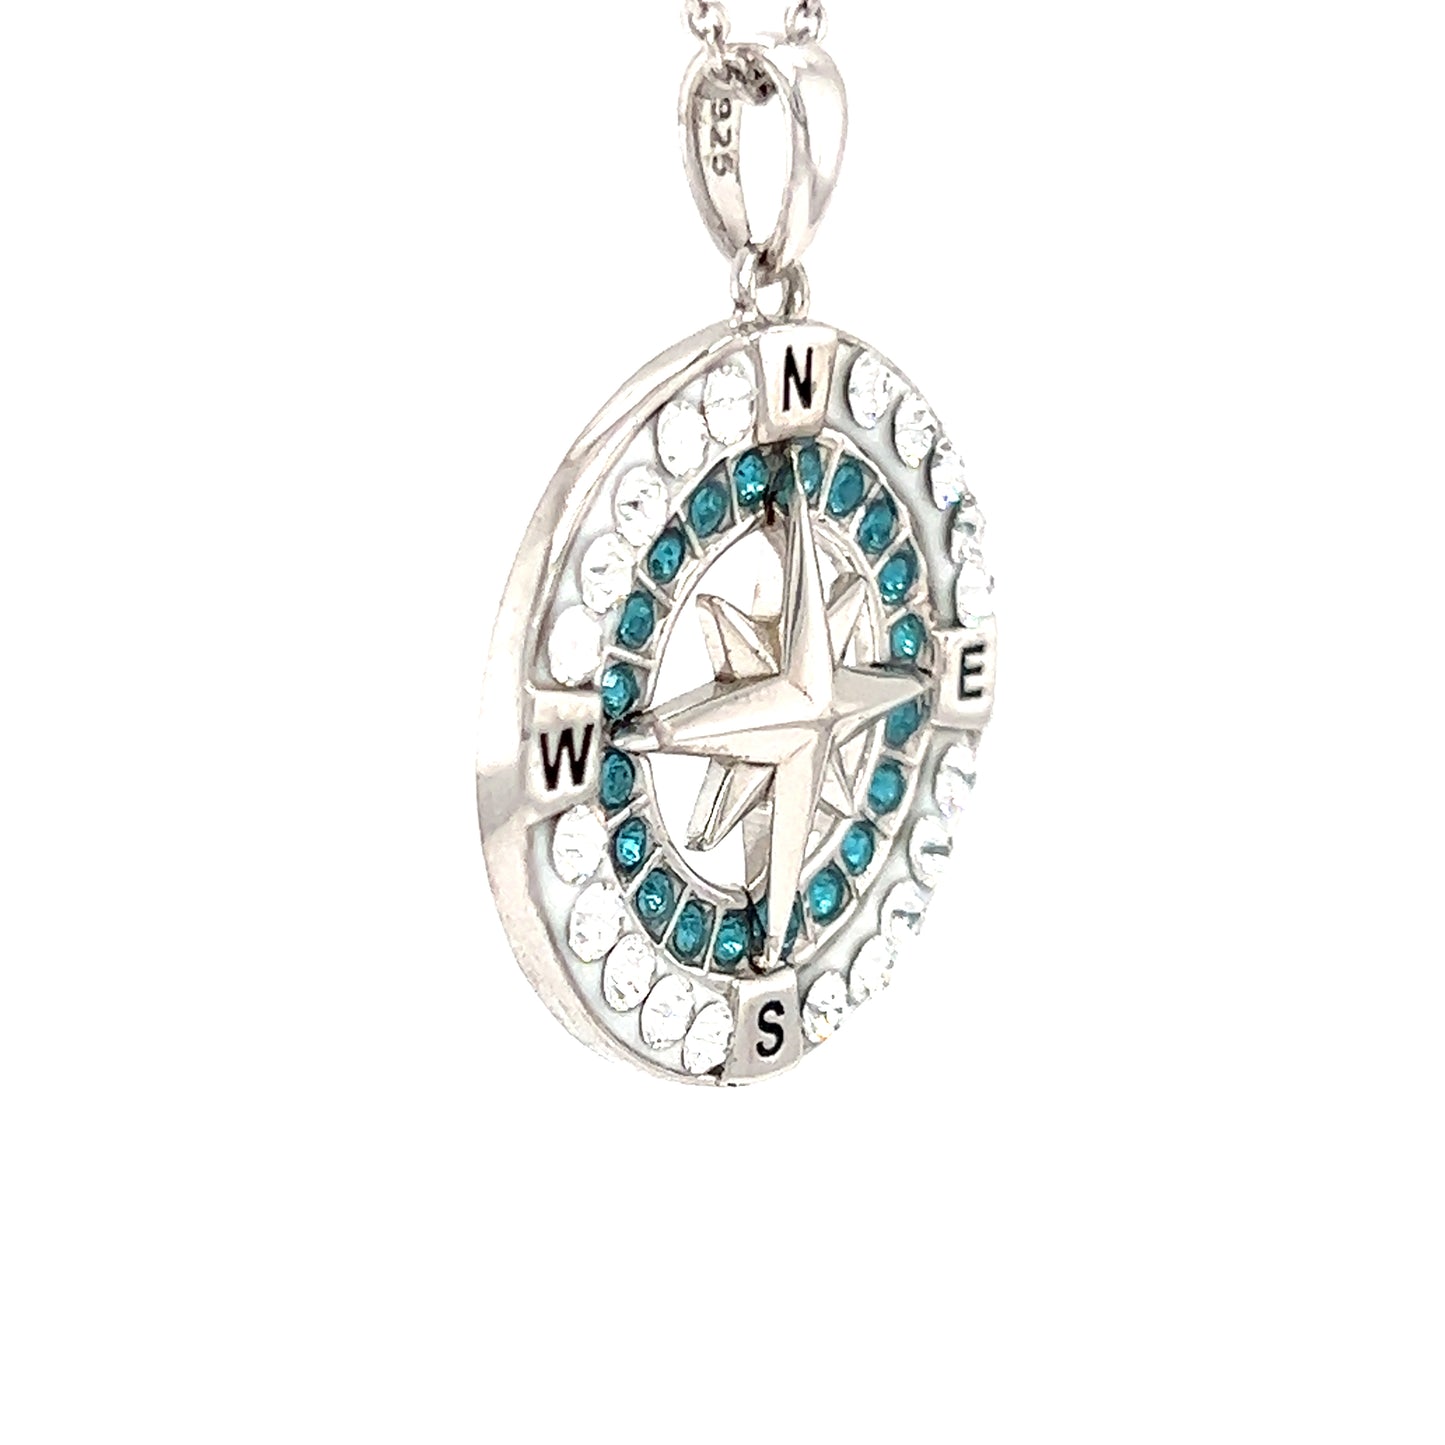 Compass Necklace with Aqua and White Crystals in Sterling Silver Right Side View